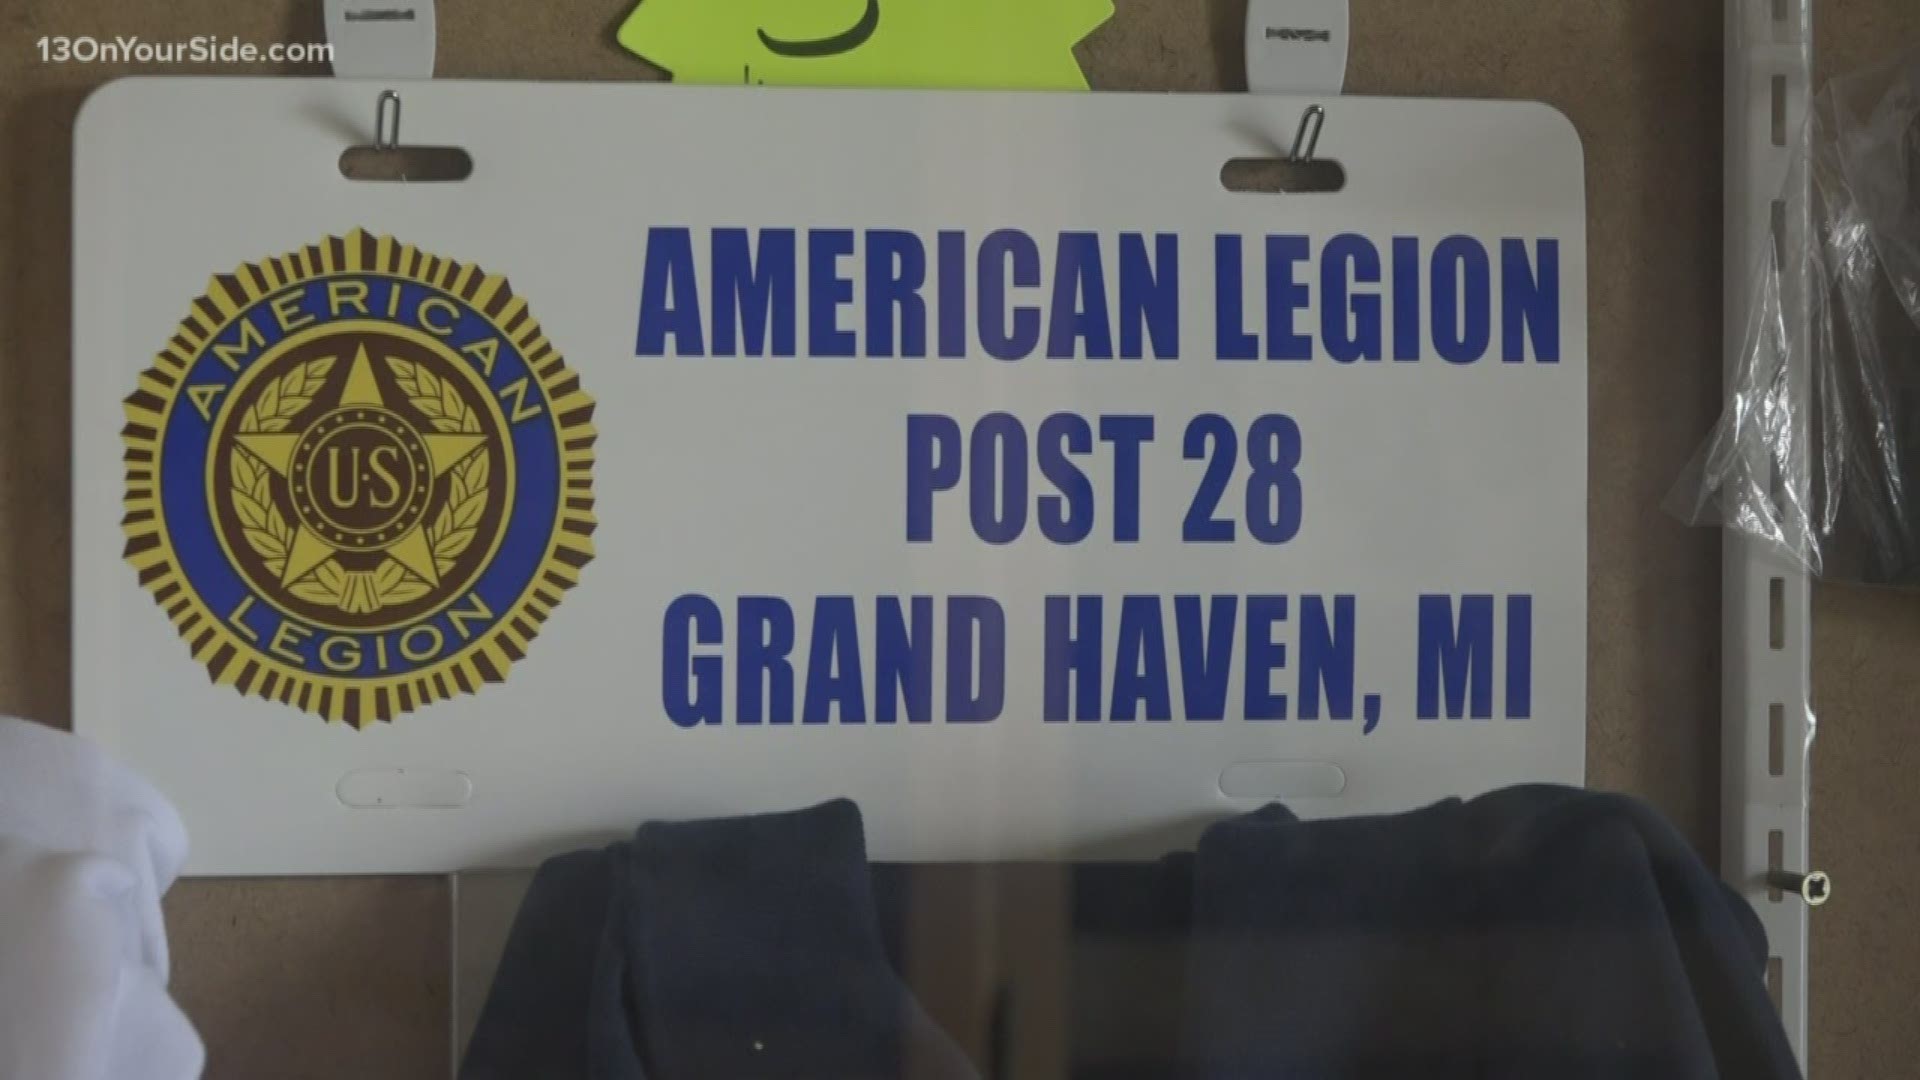 The legion and its auxiliary have made changes that leaders say will help more than 6 million veterans and spouses gain eligibility.